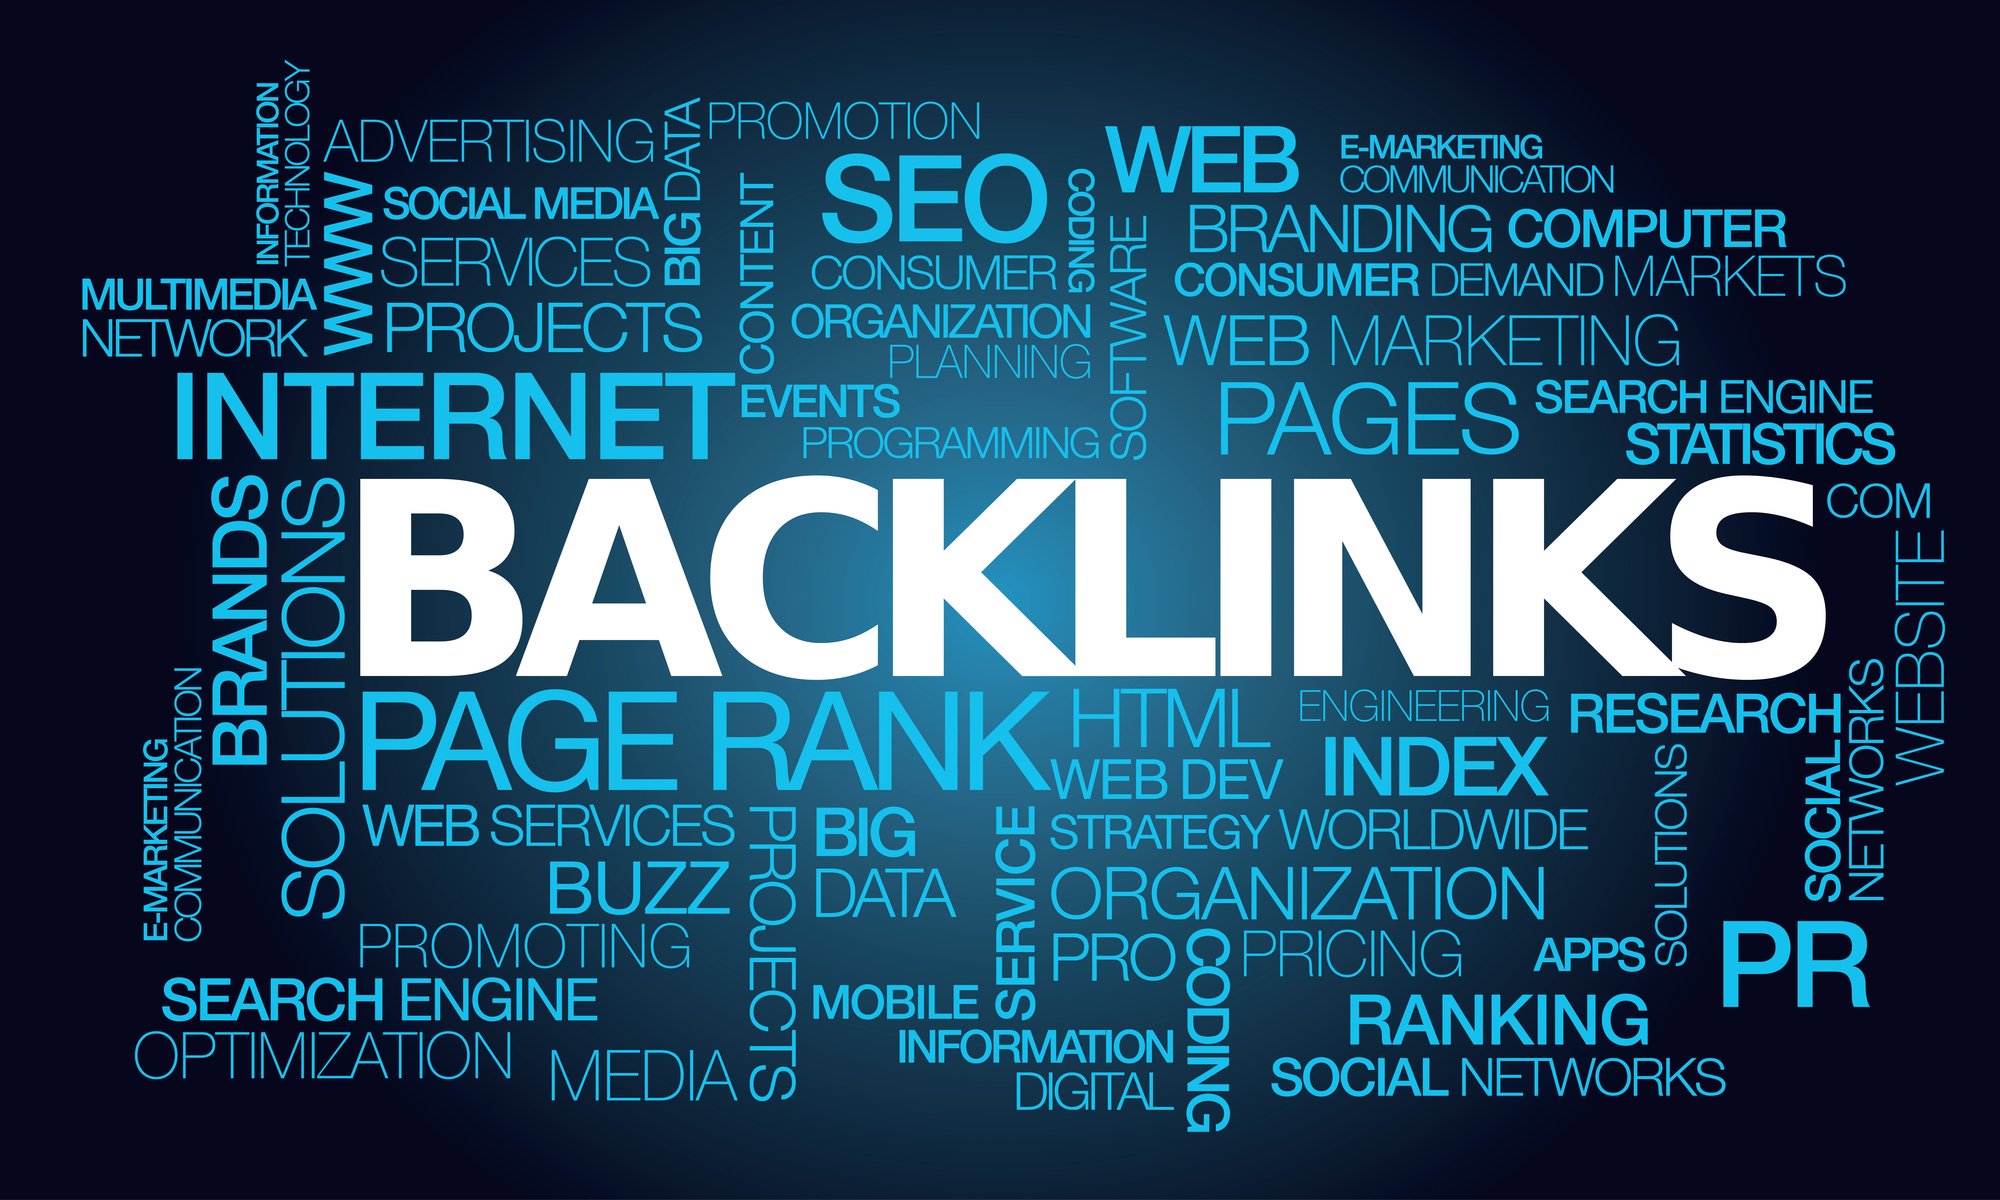 5 Ways To Get High Quality Backlinks in 2018